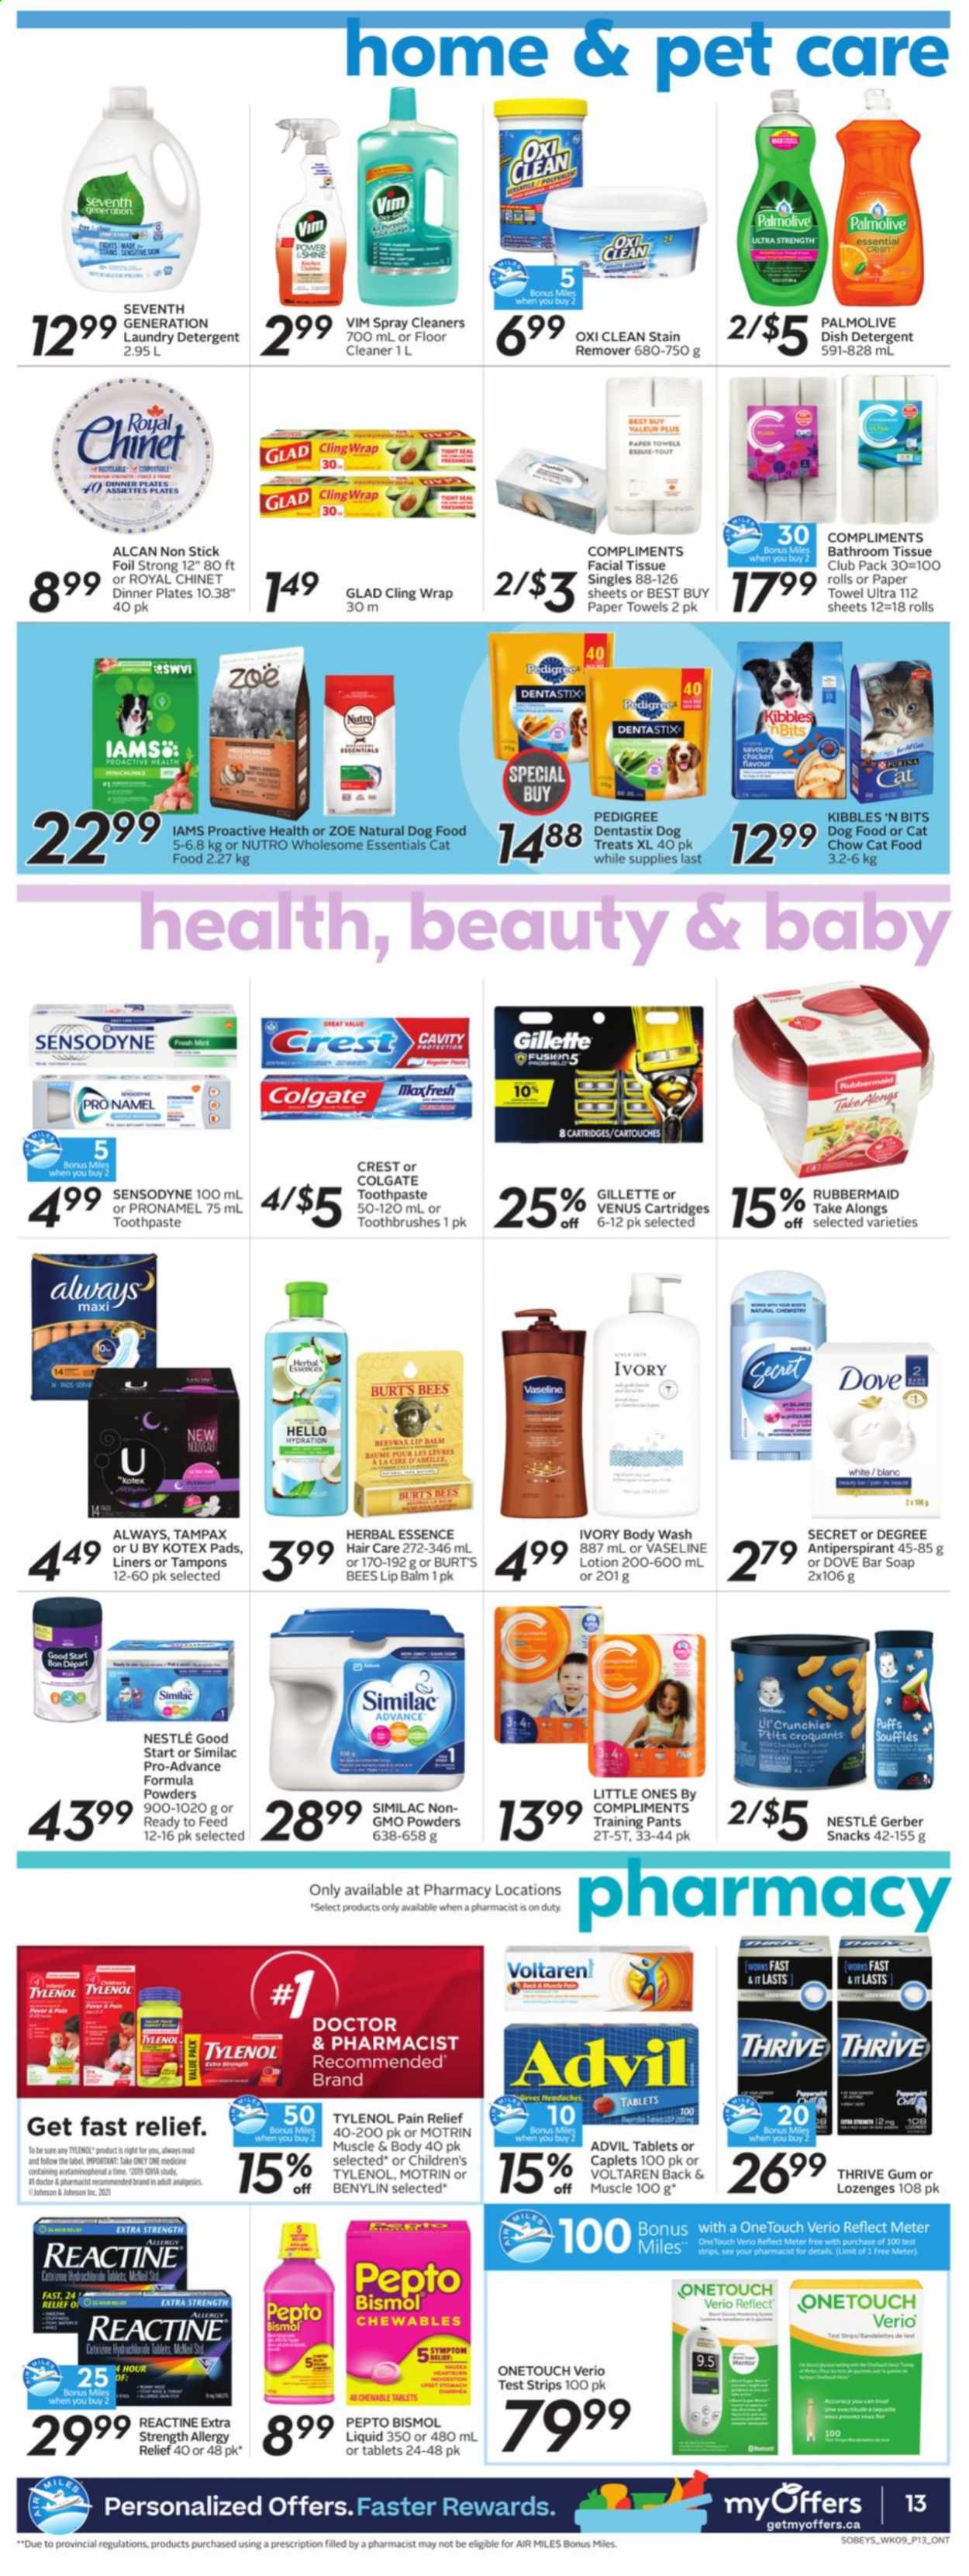 thumbnail - Sobeys Flyer - June 24, 2021 - June 30, 2021 - Sales products - puffs, snack, Gerber, Similac, pants, Johnson's, baby pants, bath tissue, kitchen towels, paper towels, cleaner, stain remover, laundry detergent, body wash, Palmolive, Vaseline, soap bar, soap, toothpaste, Crest, Kotex, Kotex pads, tampons, lip balm, body lotion, anti-perspirant, Sure, Zoe, Venus, animal food, cat food, dog food, Dentastix, Pedigree, Iams, pain relief, Tylenol, Advil Rapid, Benylin, allergy relief, Motrin, Nestlé, Gillette, Tampax, Sensodyne. Page 11.